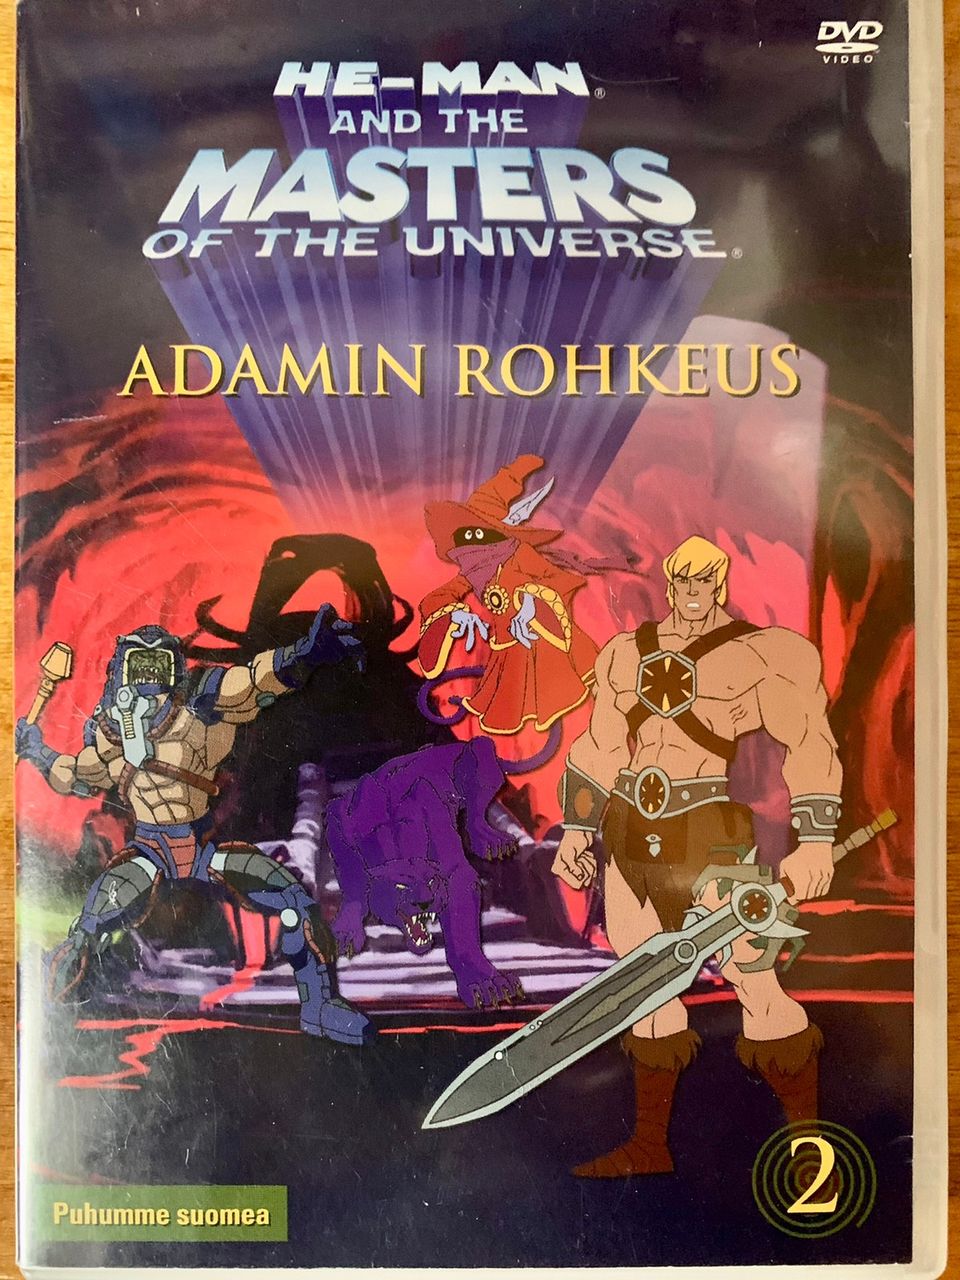 He-Man and the Masters of the Universe osa 2: Adamin rohkeus DVD